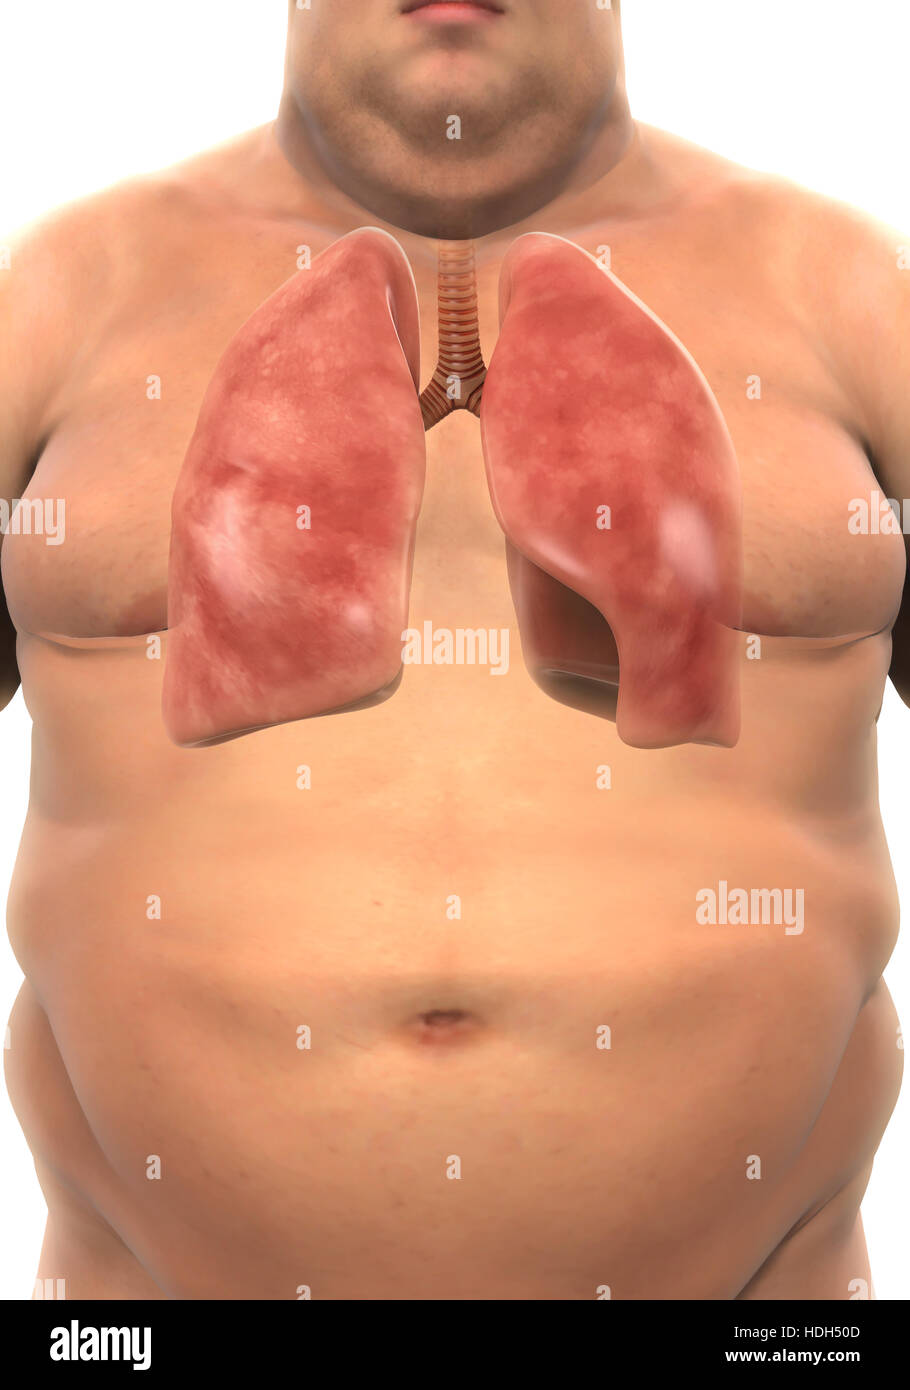 Respiratory System of Overweight Body Stock Photo